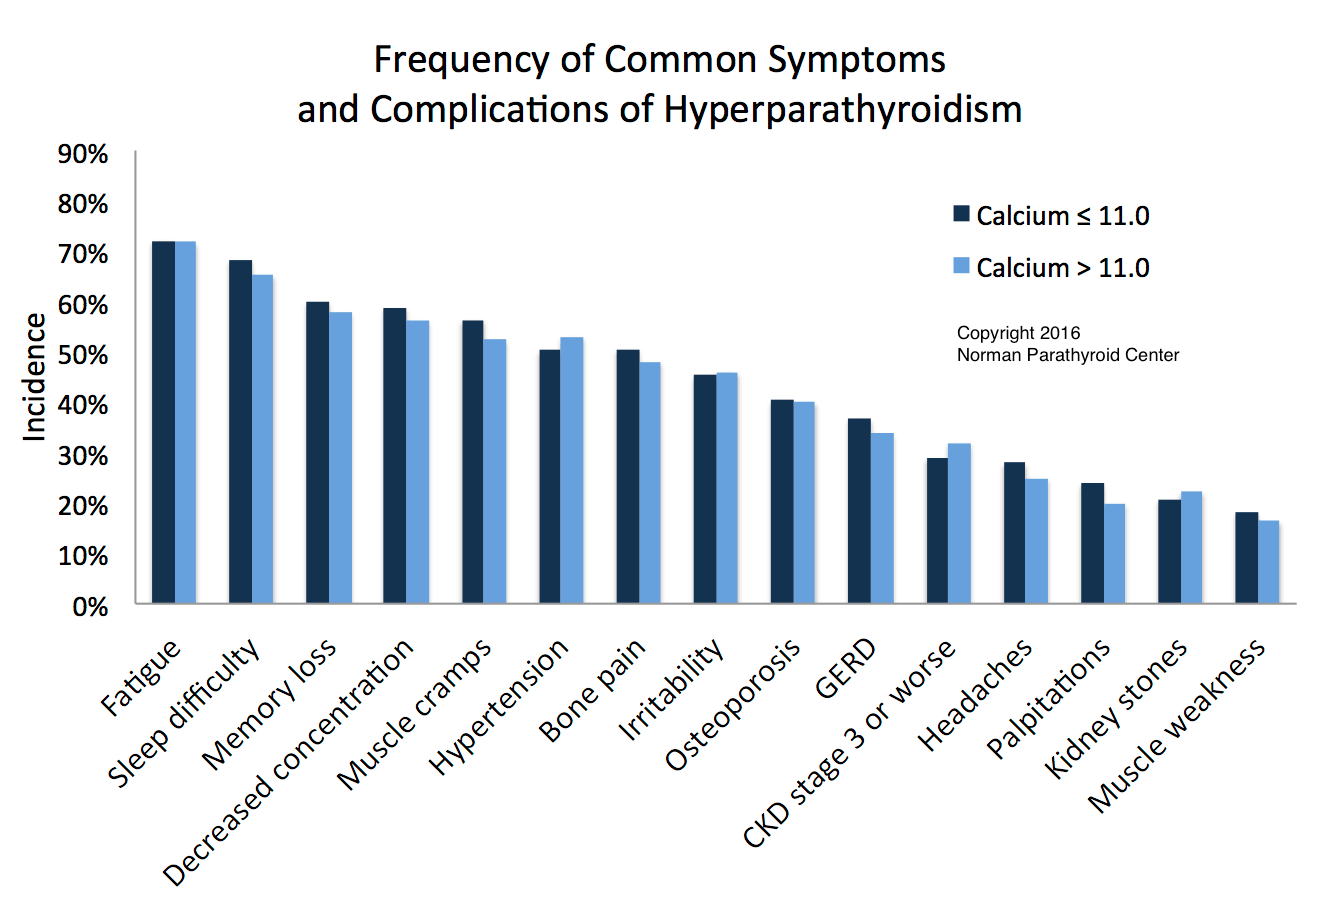 Hypercalcemia: Frequency of common symptoms and complications of  Hyperparathyroidism